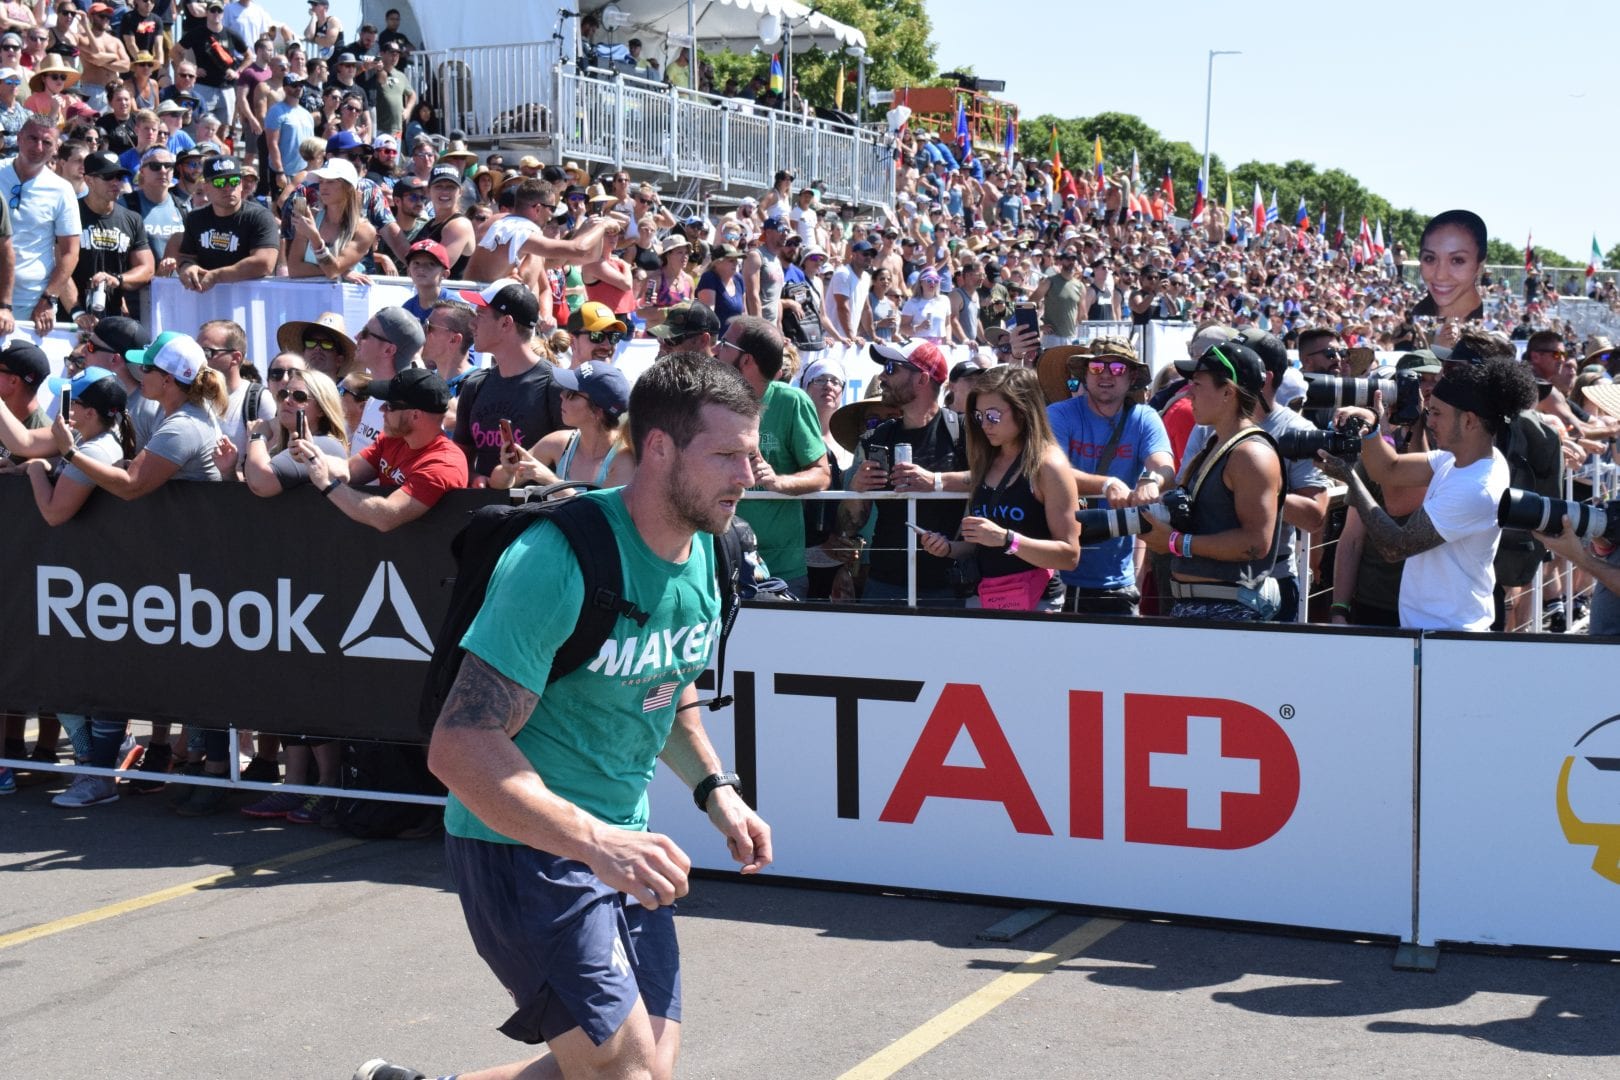 Travis Mayer completes the Ruck Run event at the 2019 CrossFit Games.